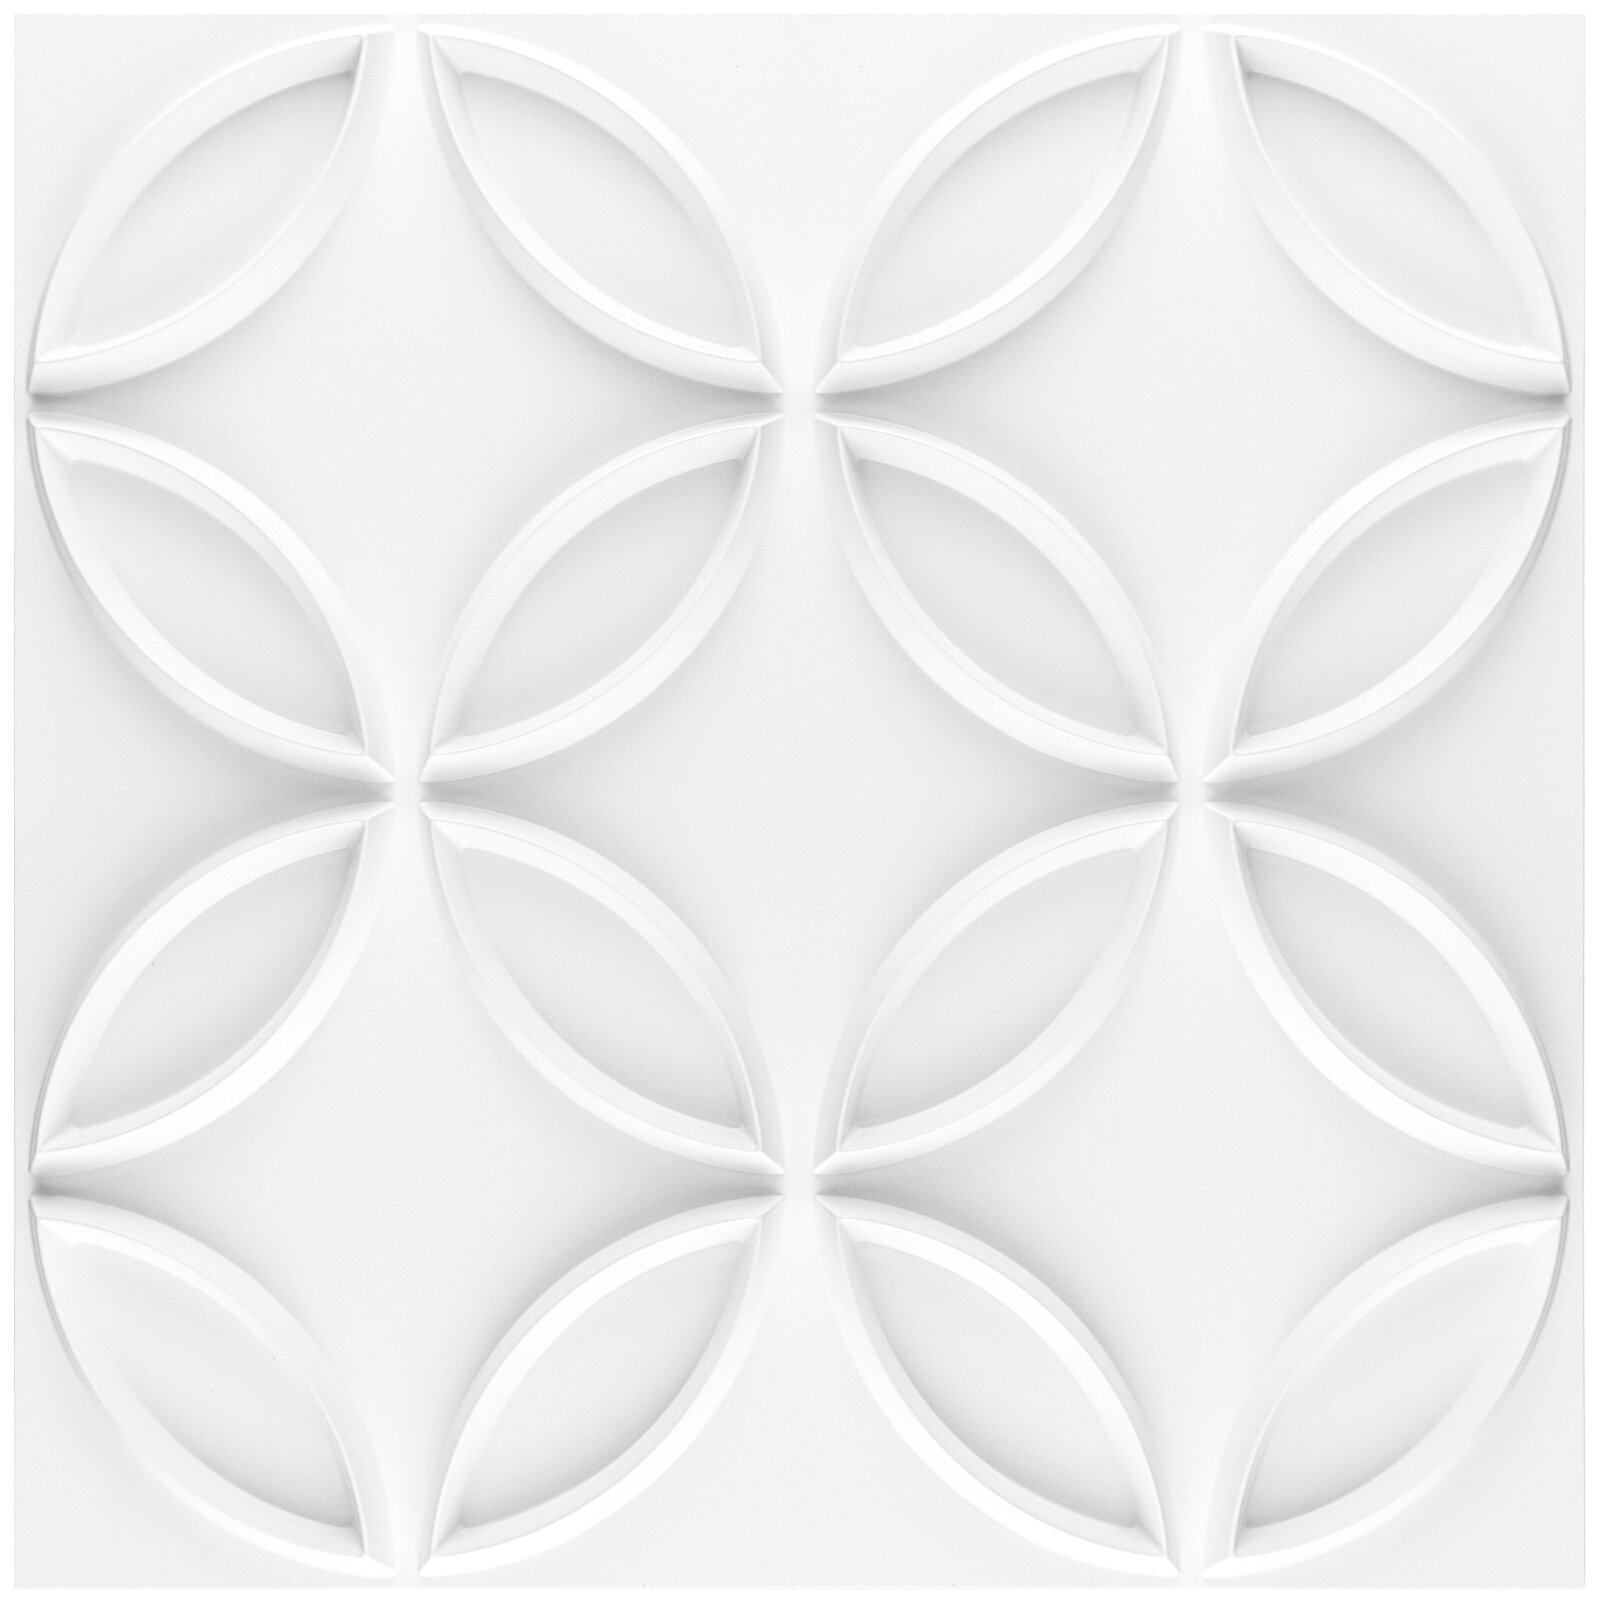 Art3d Decorative 3D Wall Panels Textured 3D Wall Covering, White, 12 Tiles 32 Sq ft